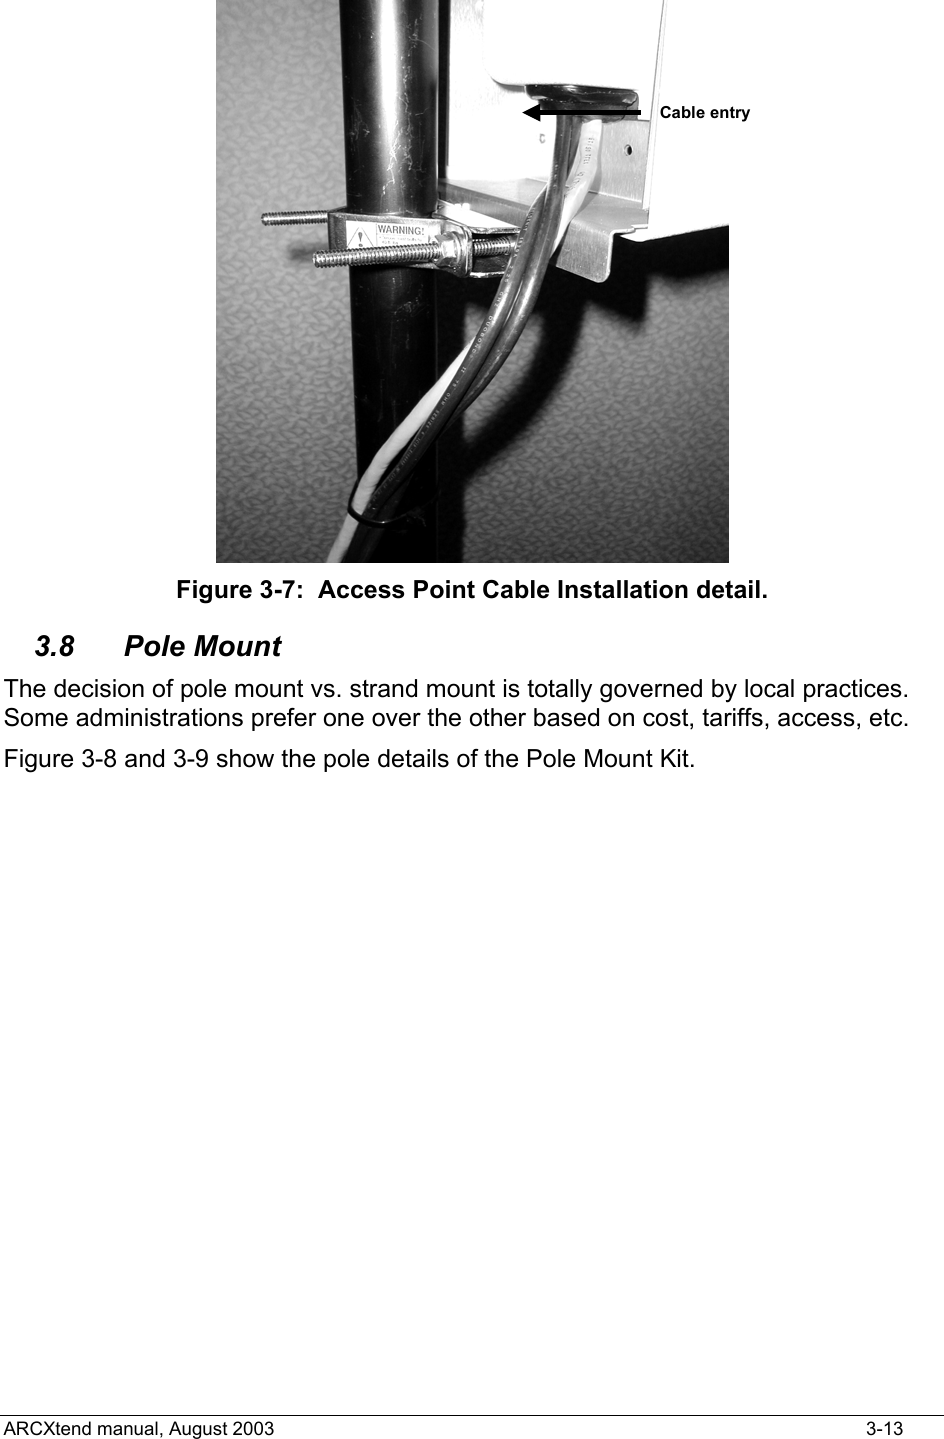  Cable entry Figure 3-7:  Access Point Cable Installation detail. 3.8 Pole Mount The decision of pole mount vs. strand mount is totally governed by local practices.  Some administrations prefer one over the other based on cost, tariffs, access, etc. Figure 3-8 and 3-9 show the pole details of the Pole Mount Kit. ARCXtend manual, August 2003    3-13 